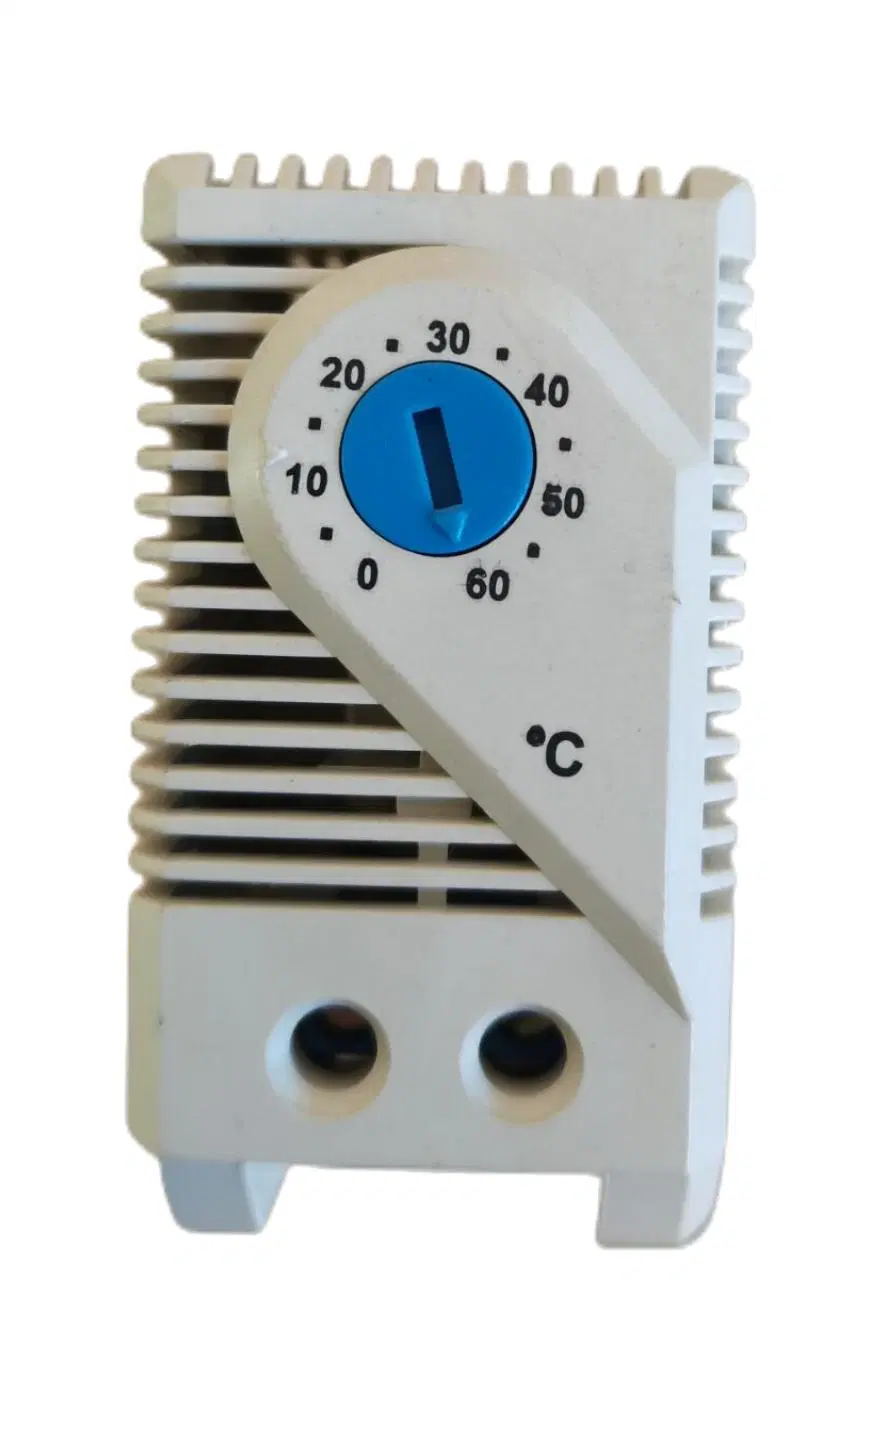 0-80 Degree Temperature Controller Small Compact Normally Closed Thermostat for Switching Signal Device Kst202